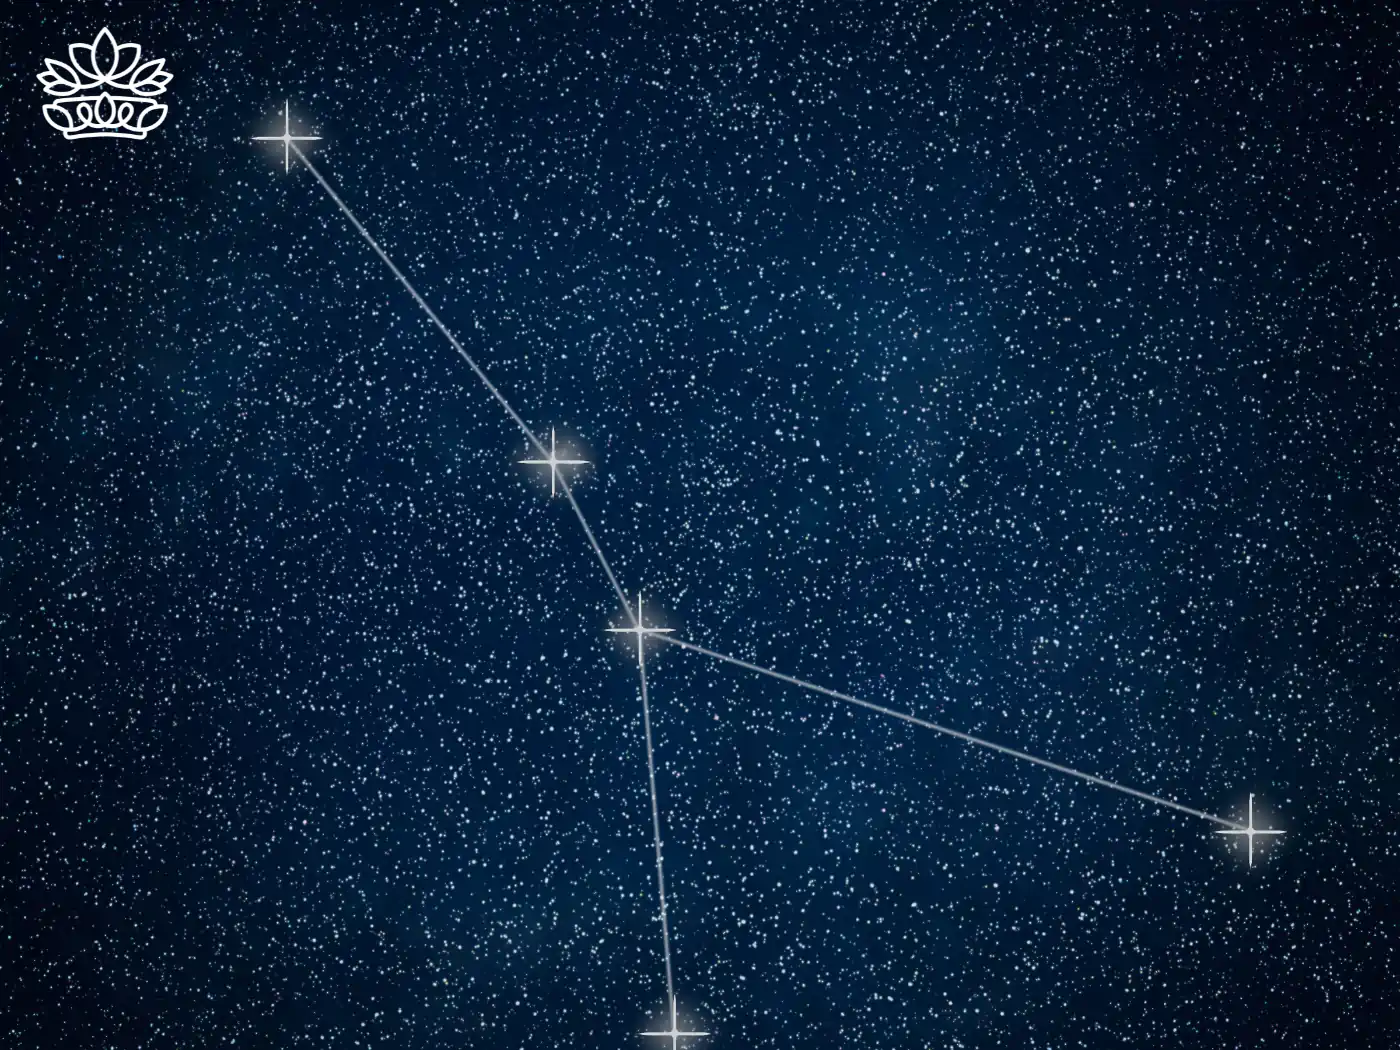 The Cancer constellation mapped out against a starry night sky - Fabulous Flowers and Gifts.